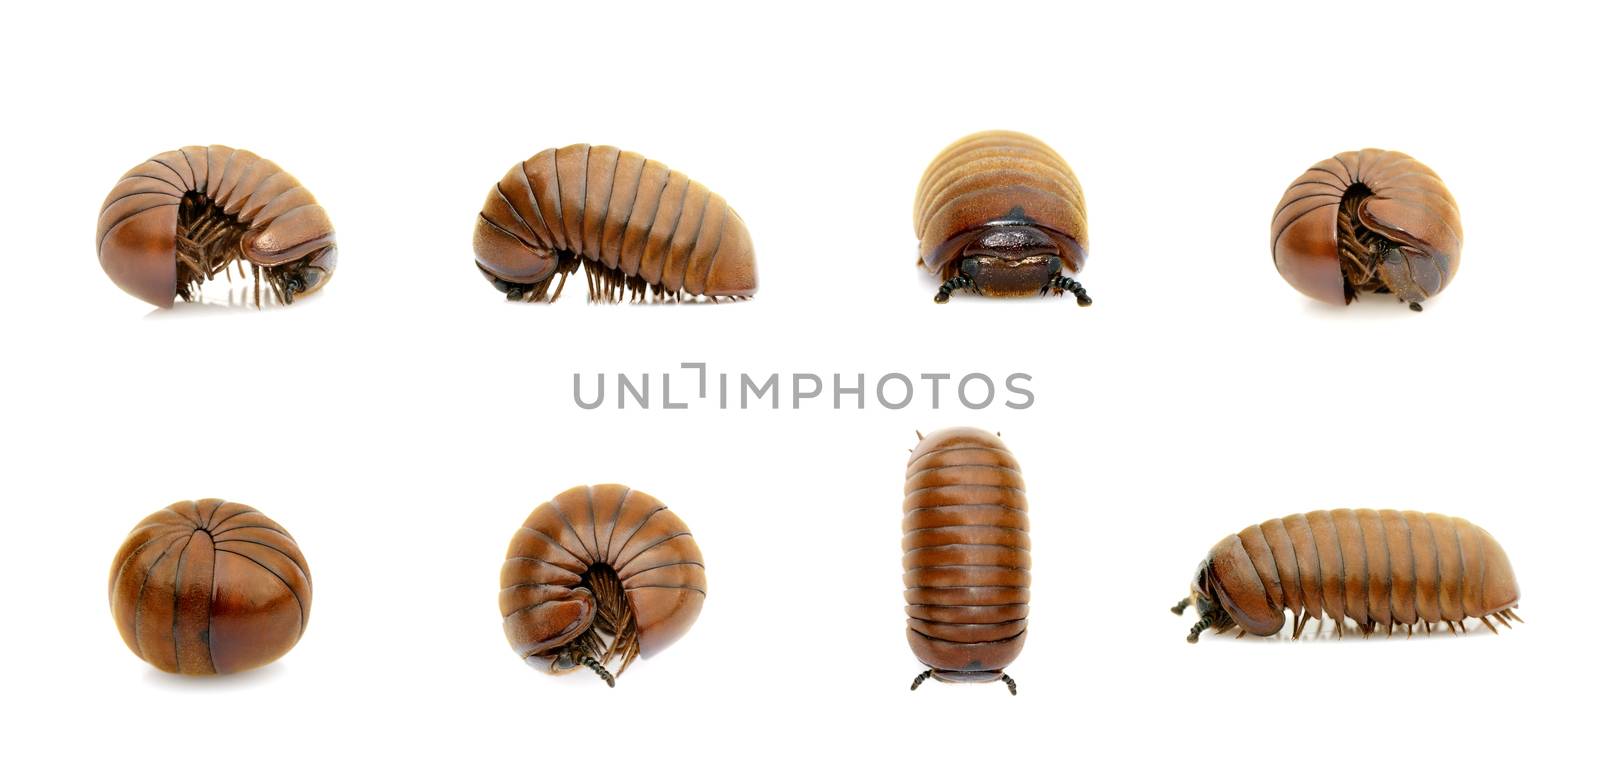 Group of pill millipede worm(Oniscomorpha) isolated on a white background. Glomerida. Insect. Animal.